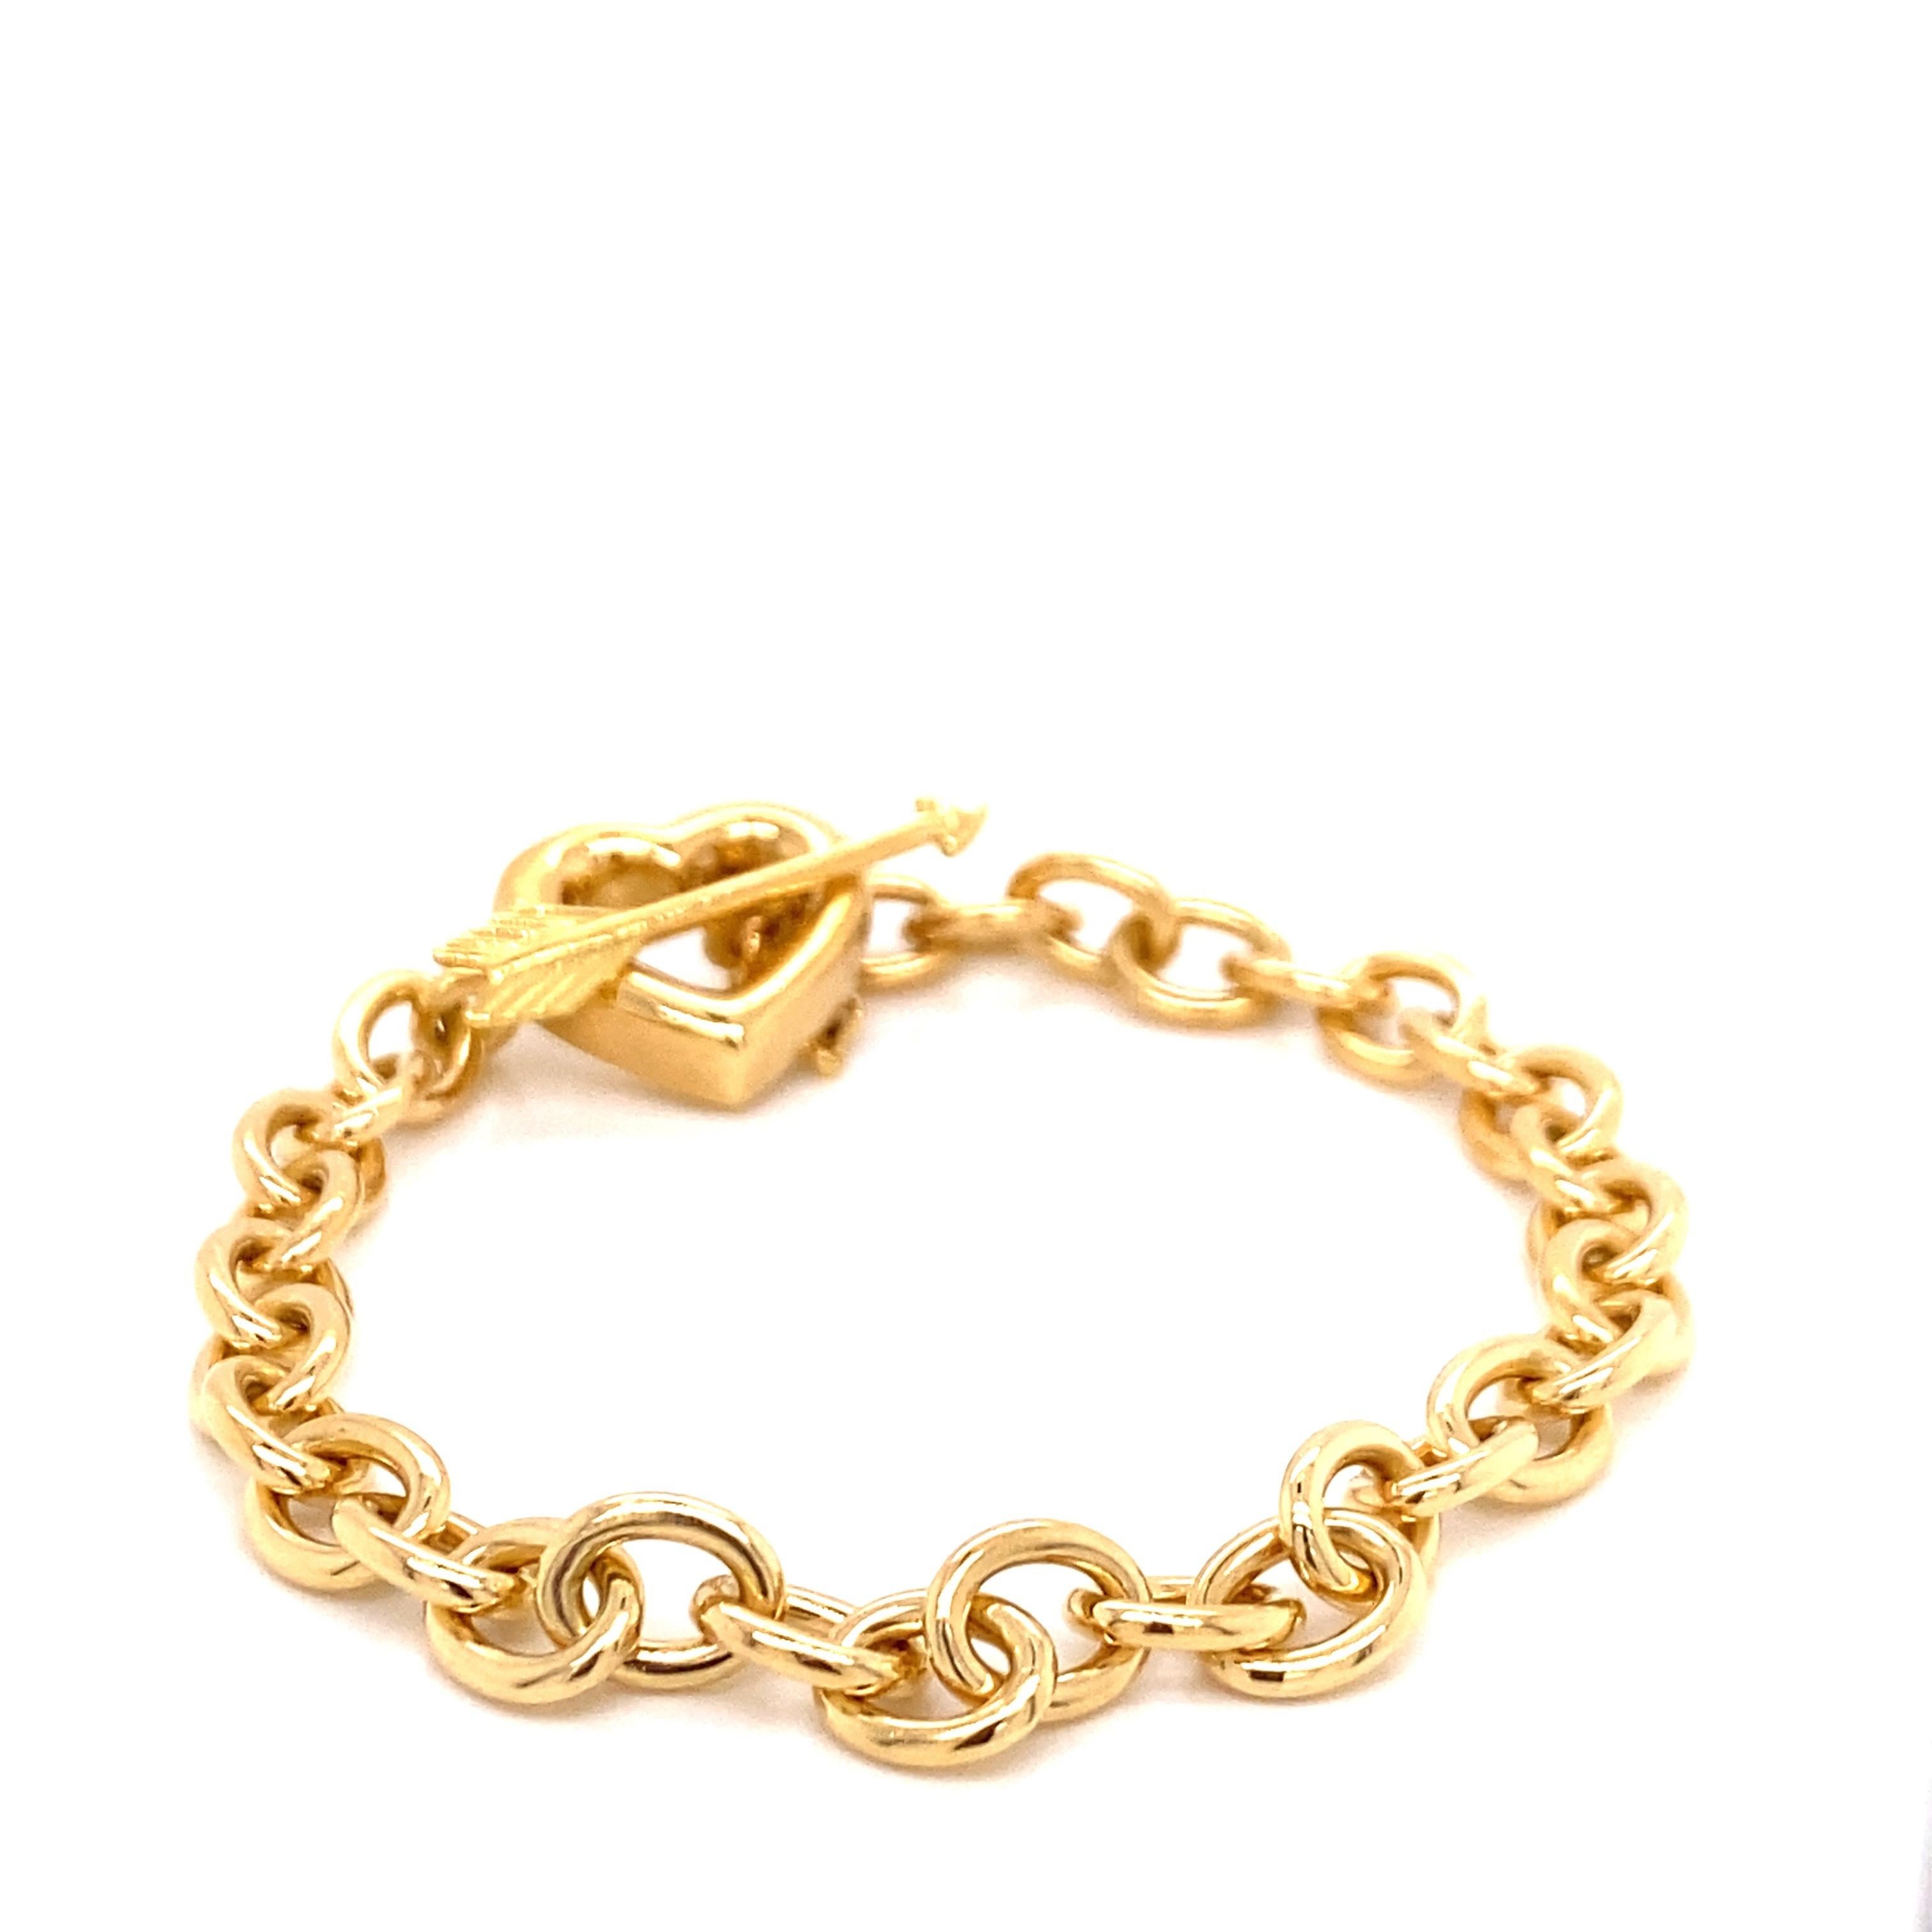 Tiffany's Vintage 1994 18K Yellow Gold Heart and Arrow Bracelet - The bracelet measures 7 inches long and 1/4 inch wide. The bracelet weighs 27.2 grams. Tiffany & Co and 1994 are hallmarked on the clasp.